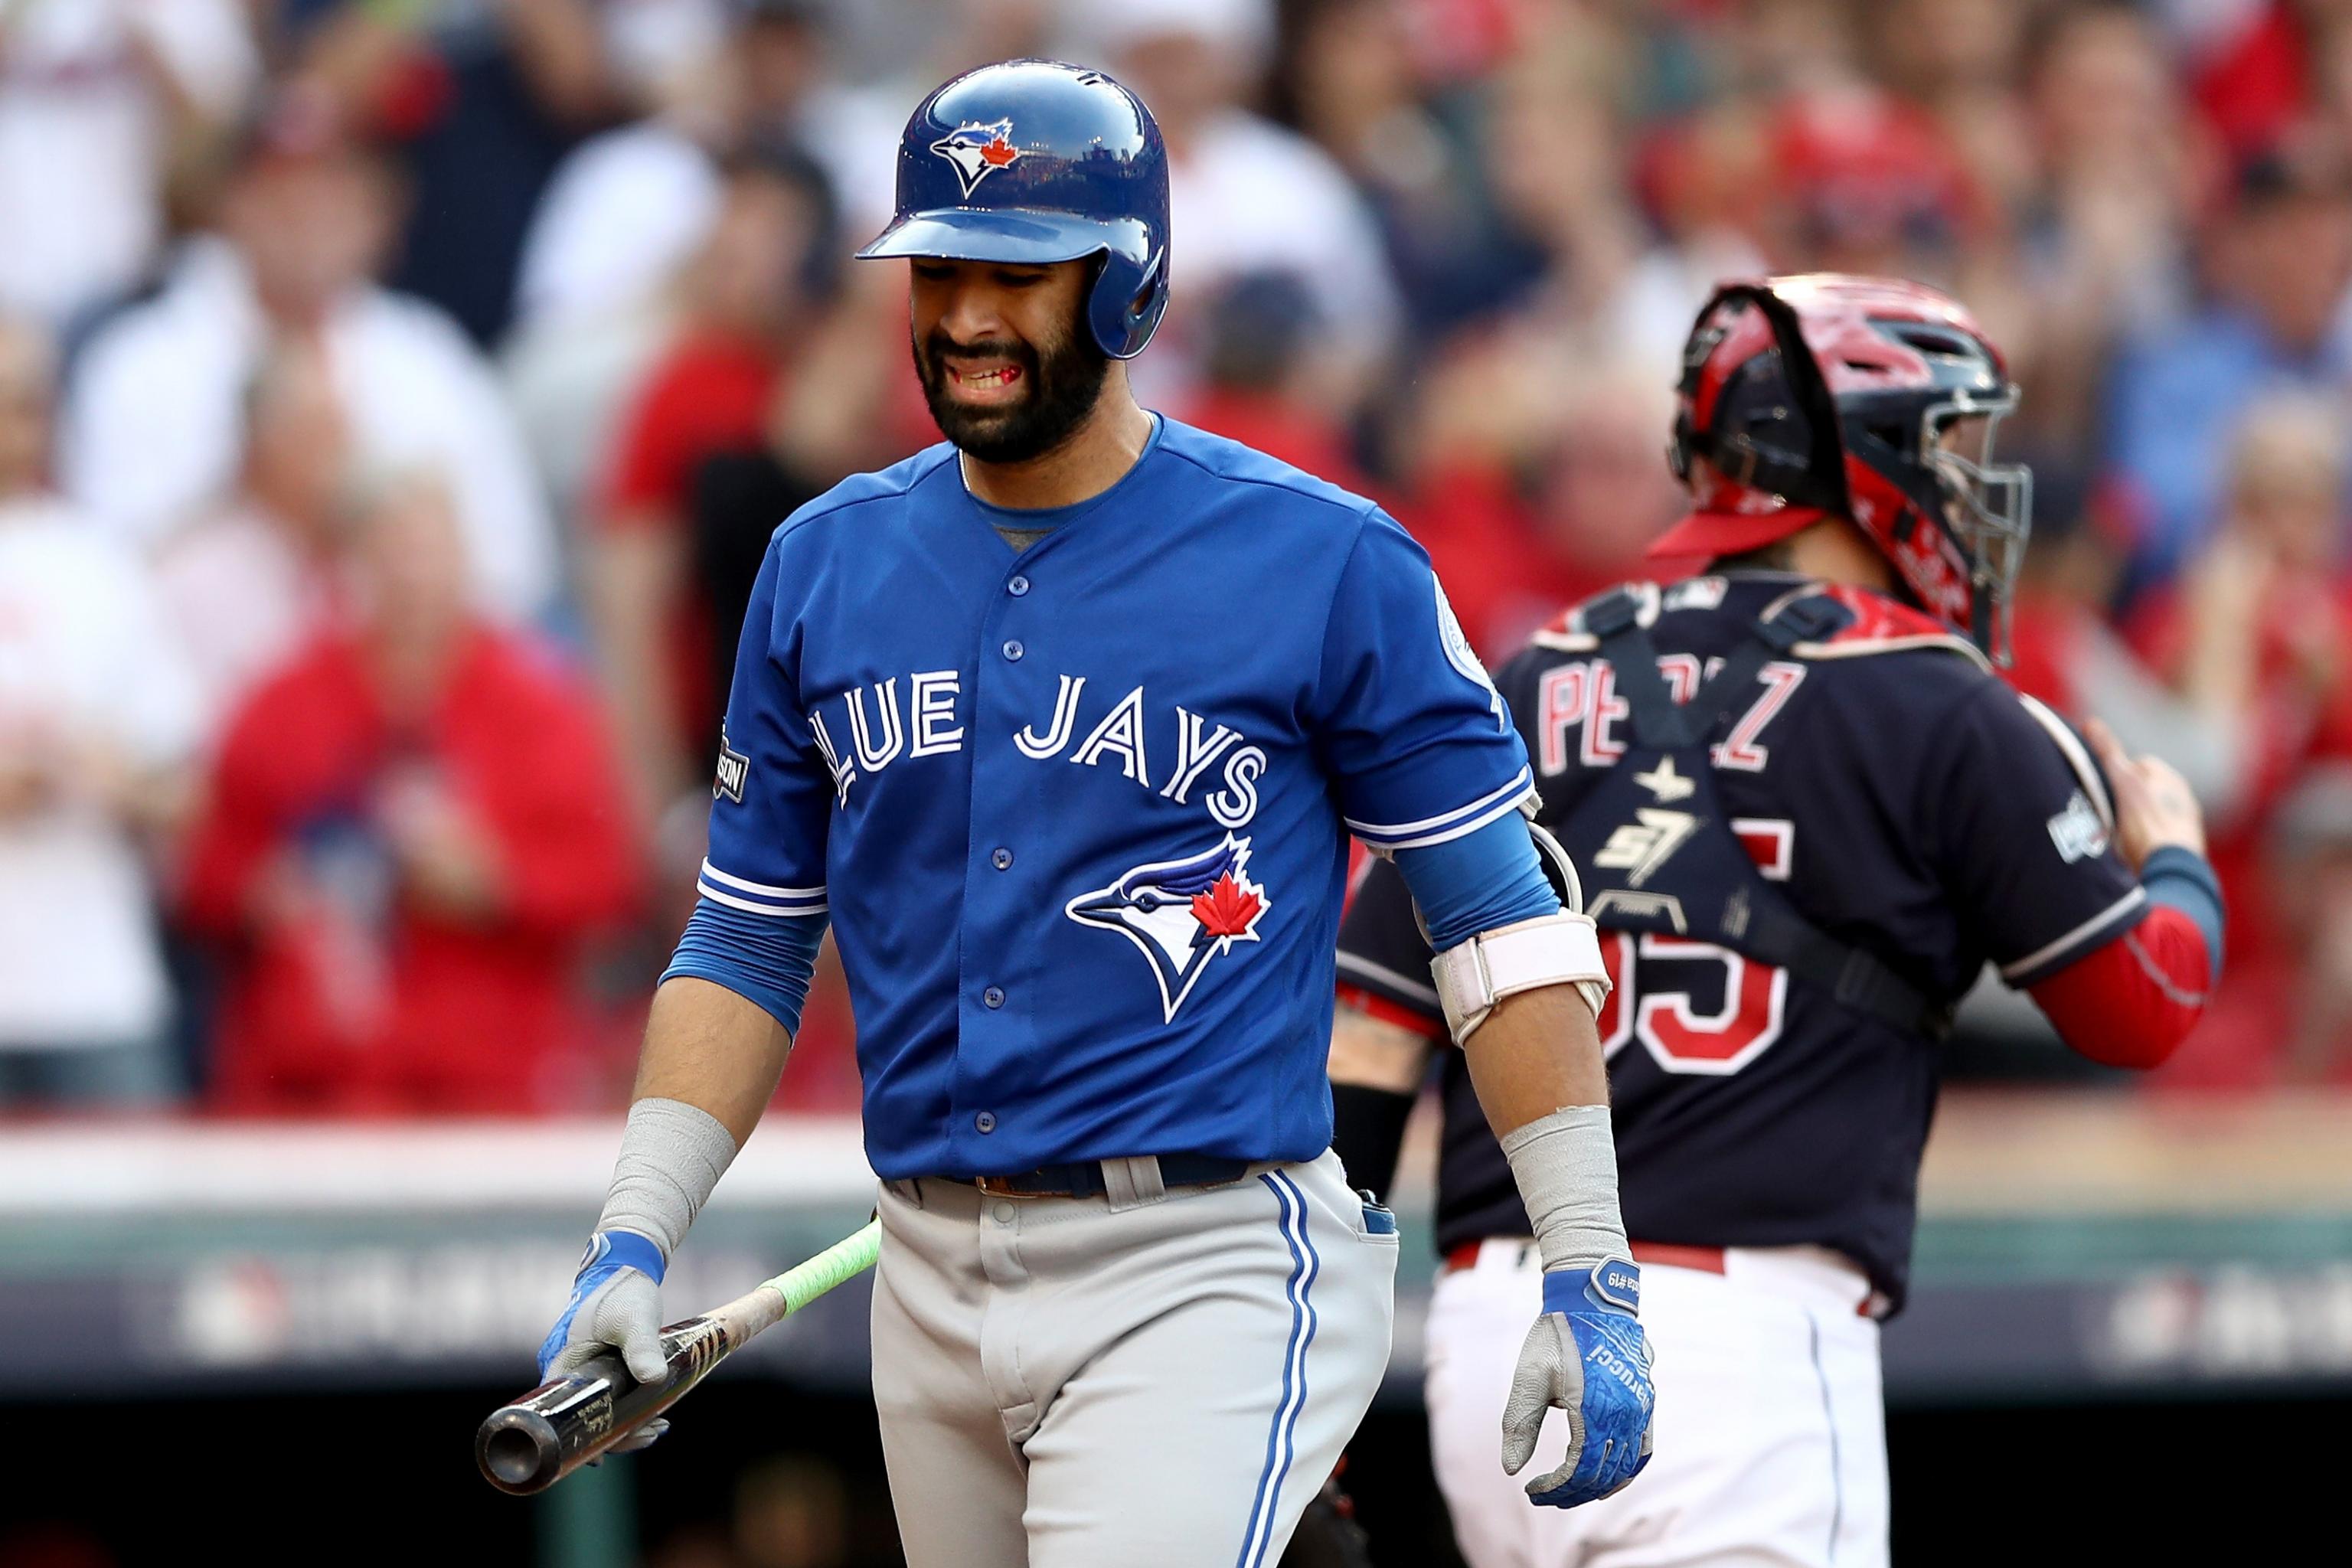 Jose Bautista is attempting a comeback as a two-way player: Does